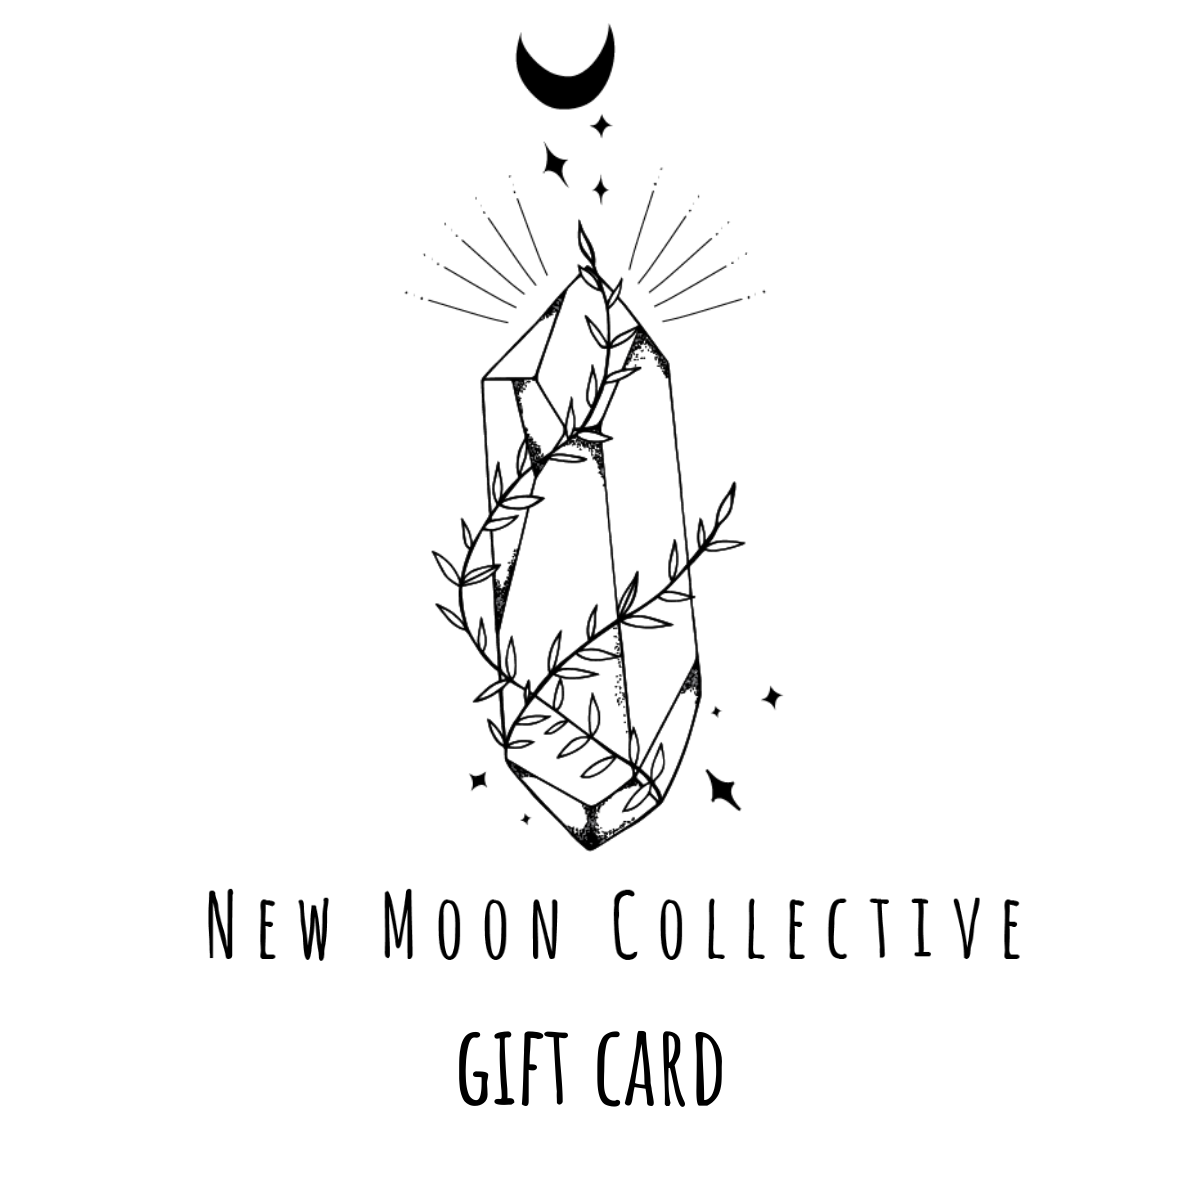 New Moon Collective Gift Card